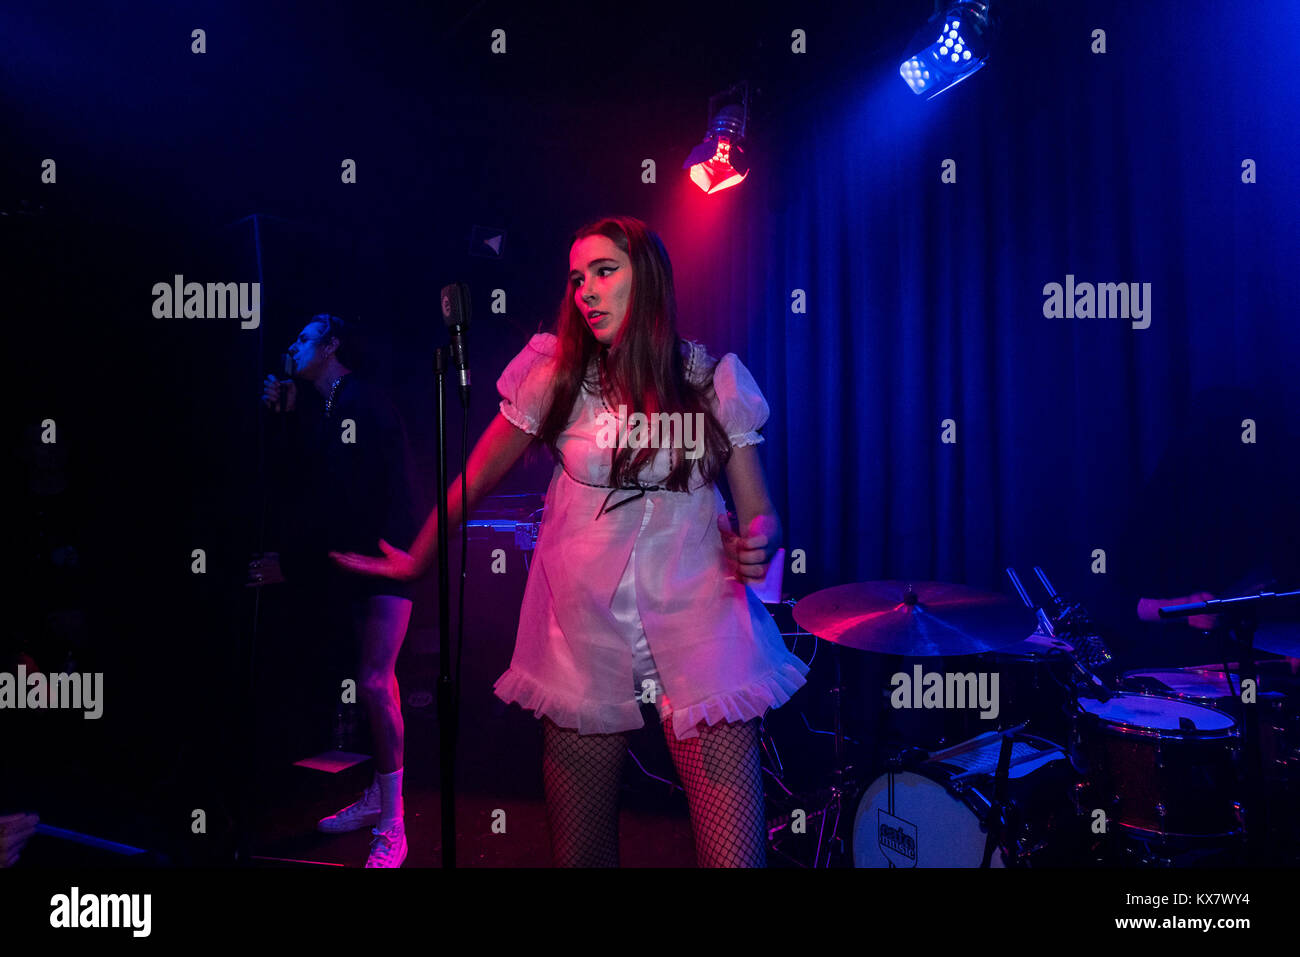 Confidence Man performs in Birmingham as part of their Ring a Ding Tour 2017  Featuring: Confidence Man, Janet Planet, Sugar Bones Where: Birmingham, North east Lincolnshire, United Kingdom When: 08 Dec 2017 Credit: WENN.com Stock Photo